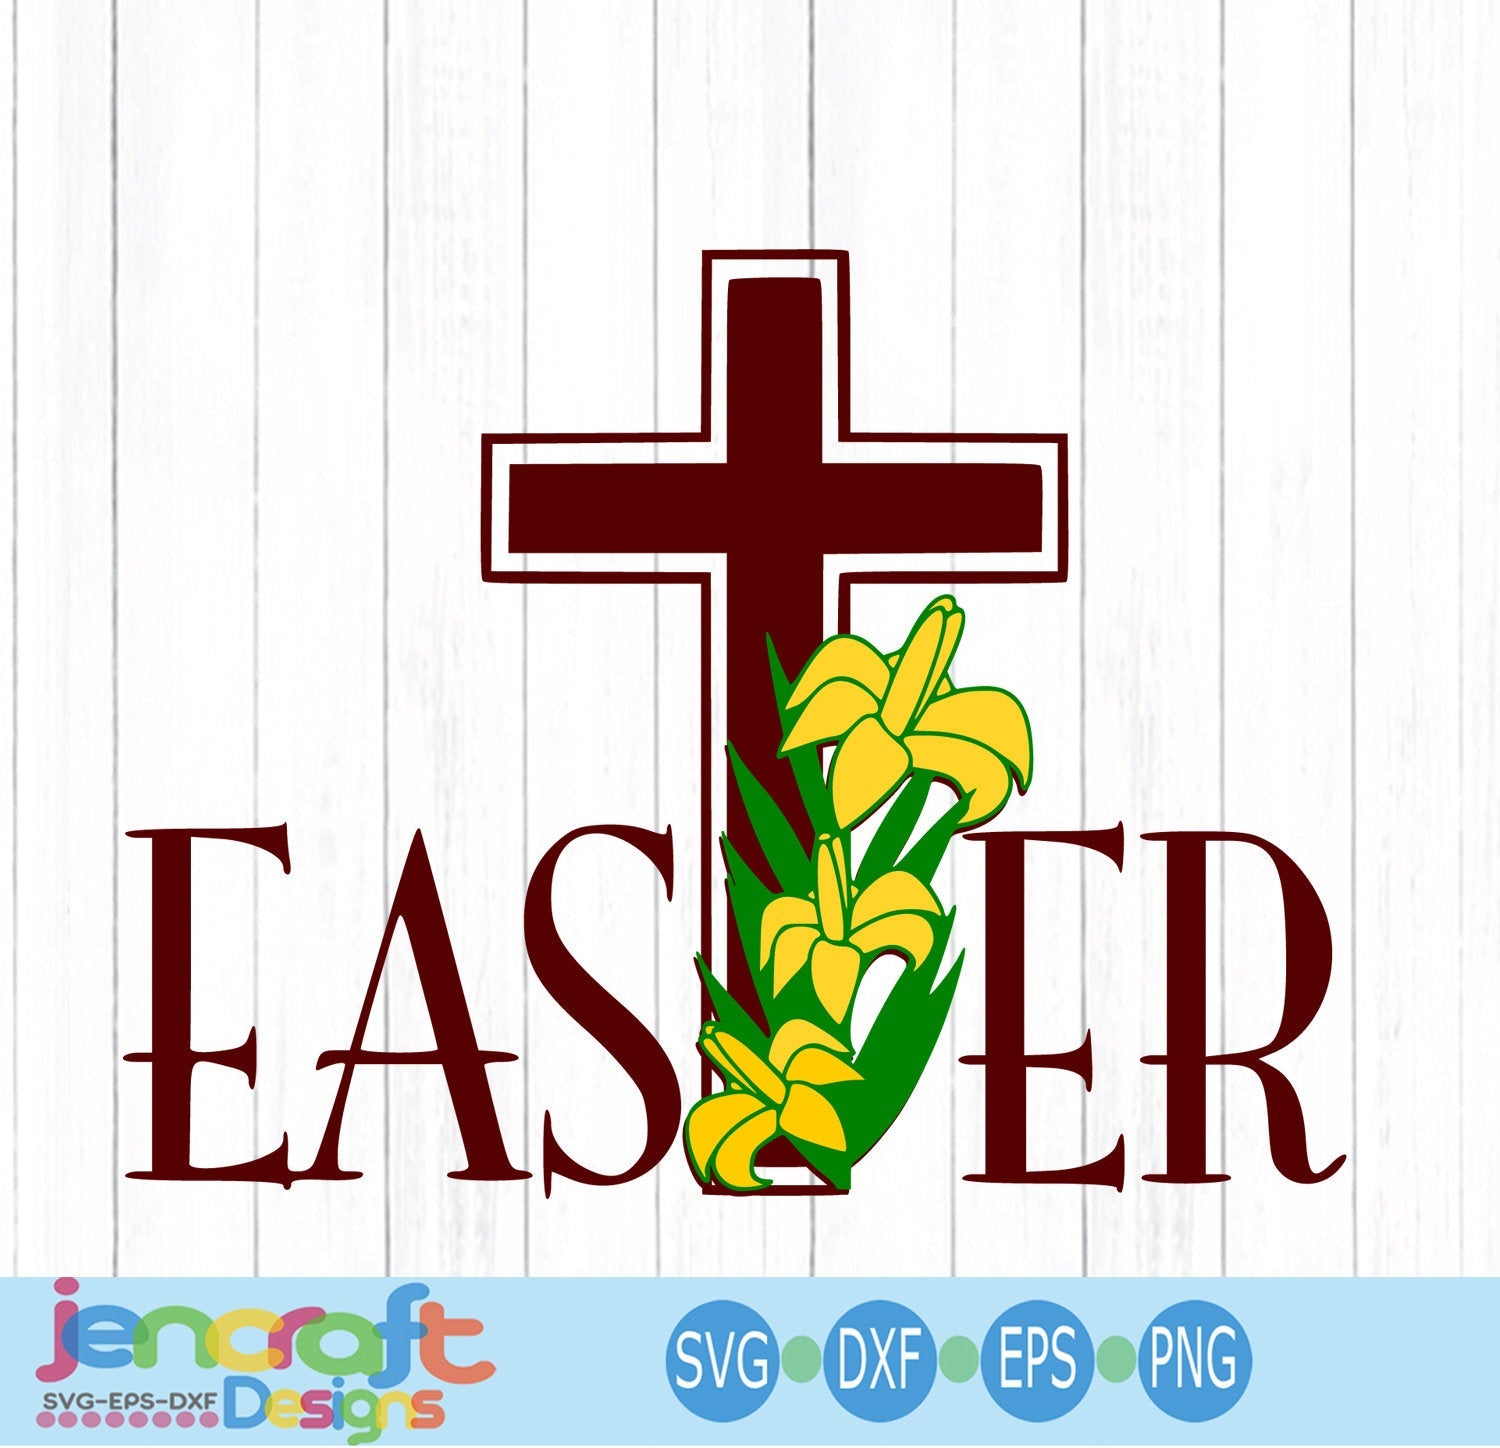 Easter Cross SVG, EPS, DXF and PNG - JenCraft Designs